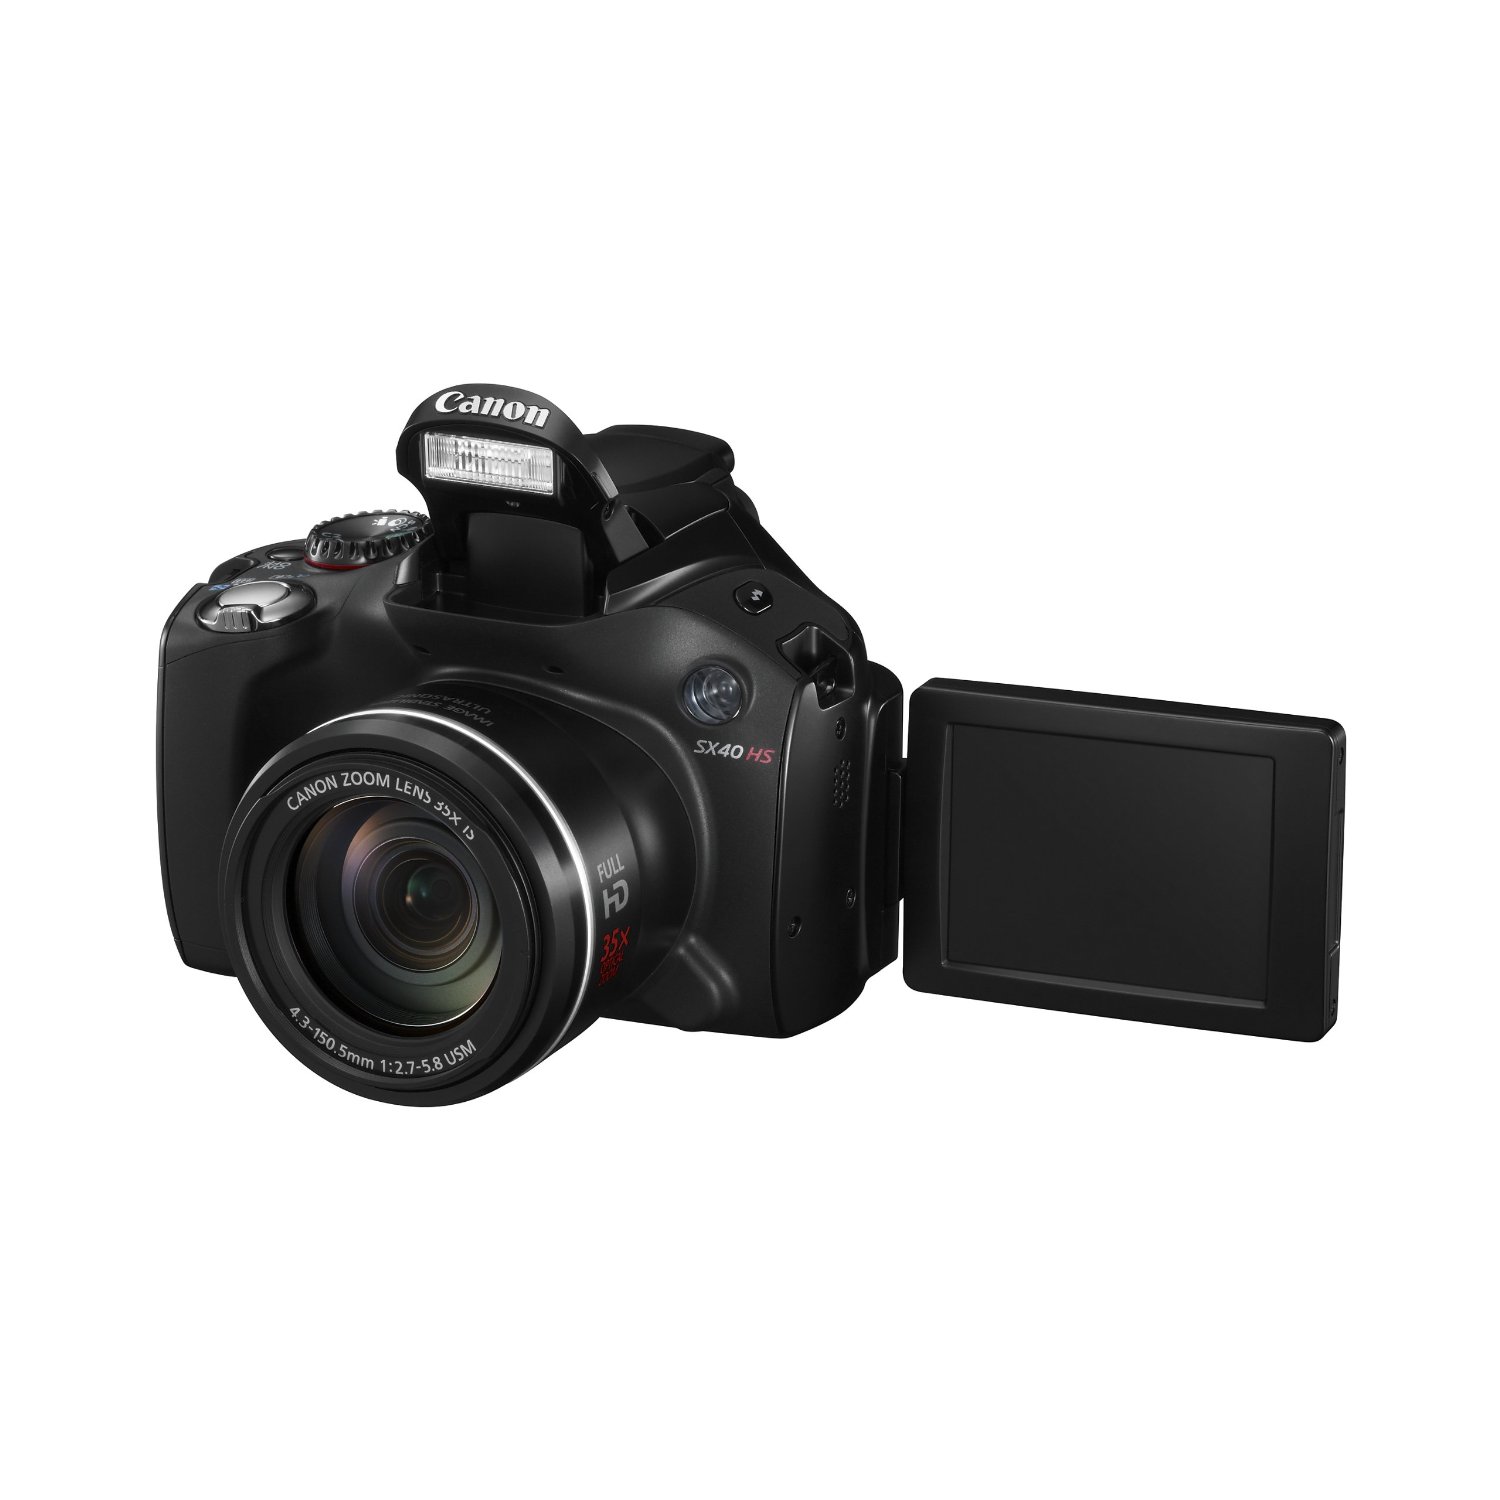 http://thetechjournal.com/wp-content/uploads/images/1110/1319693952-canons-new-sx40-hs-121mp-digital-camera-8.jpg